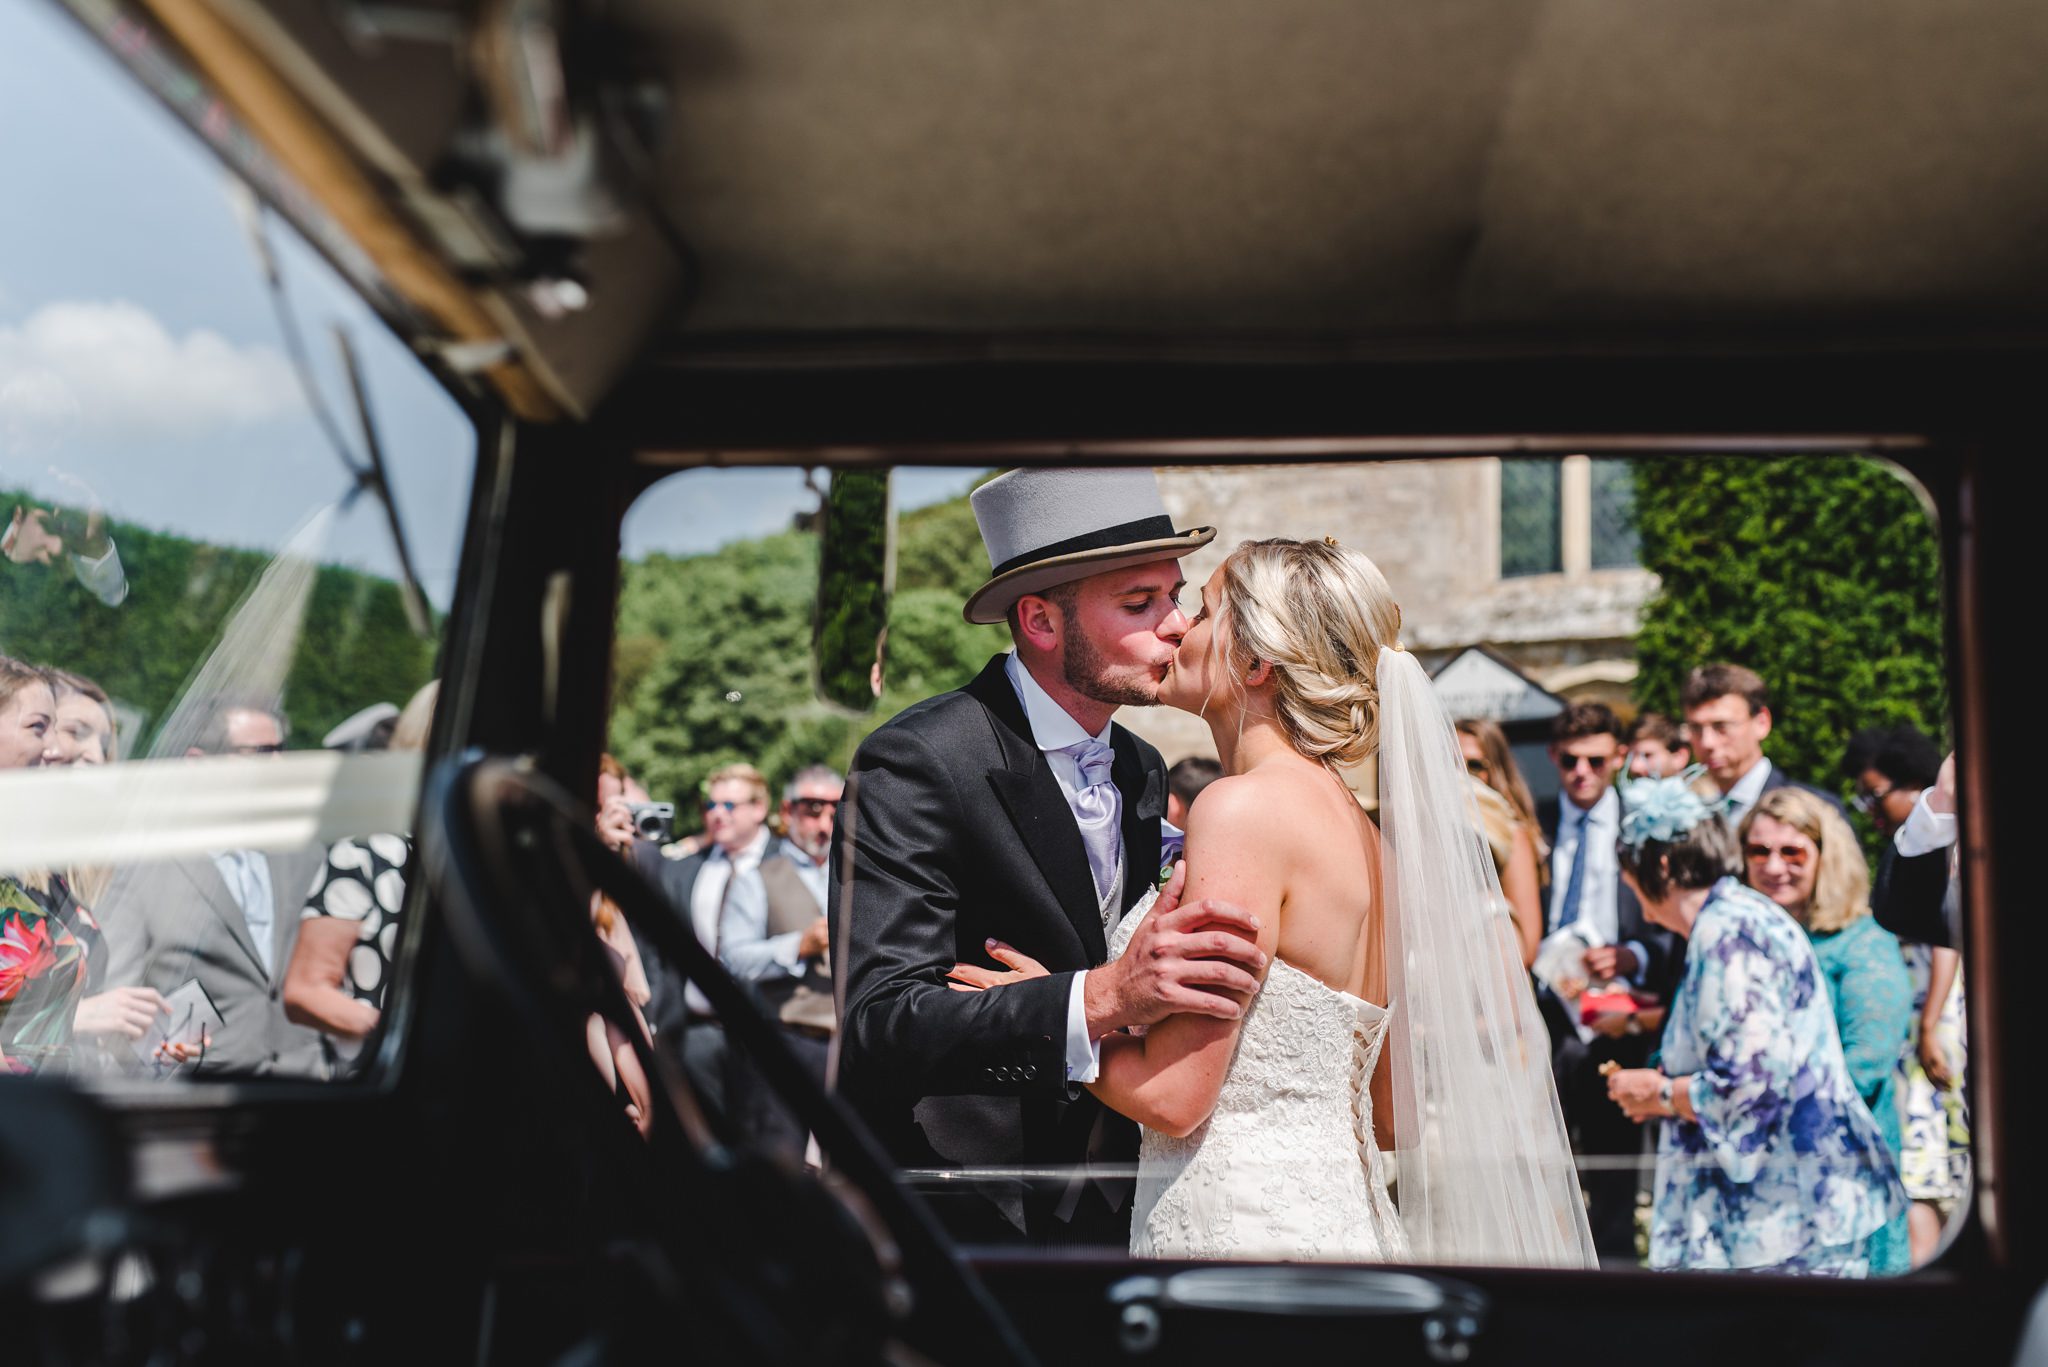 A bride and groom kissing through an open window in Gloucestershire